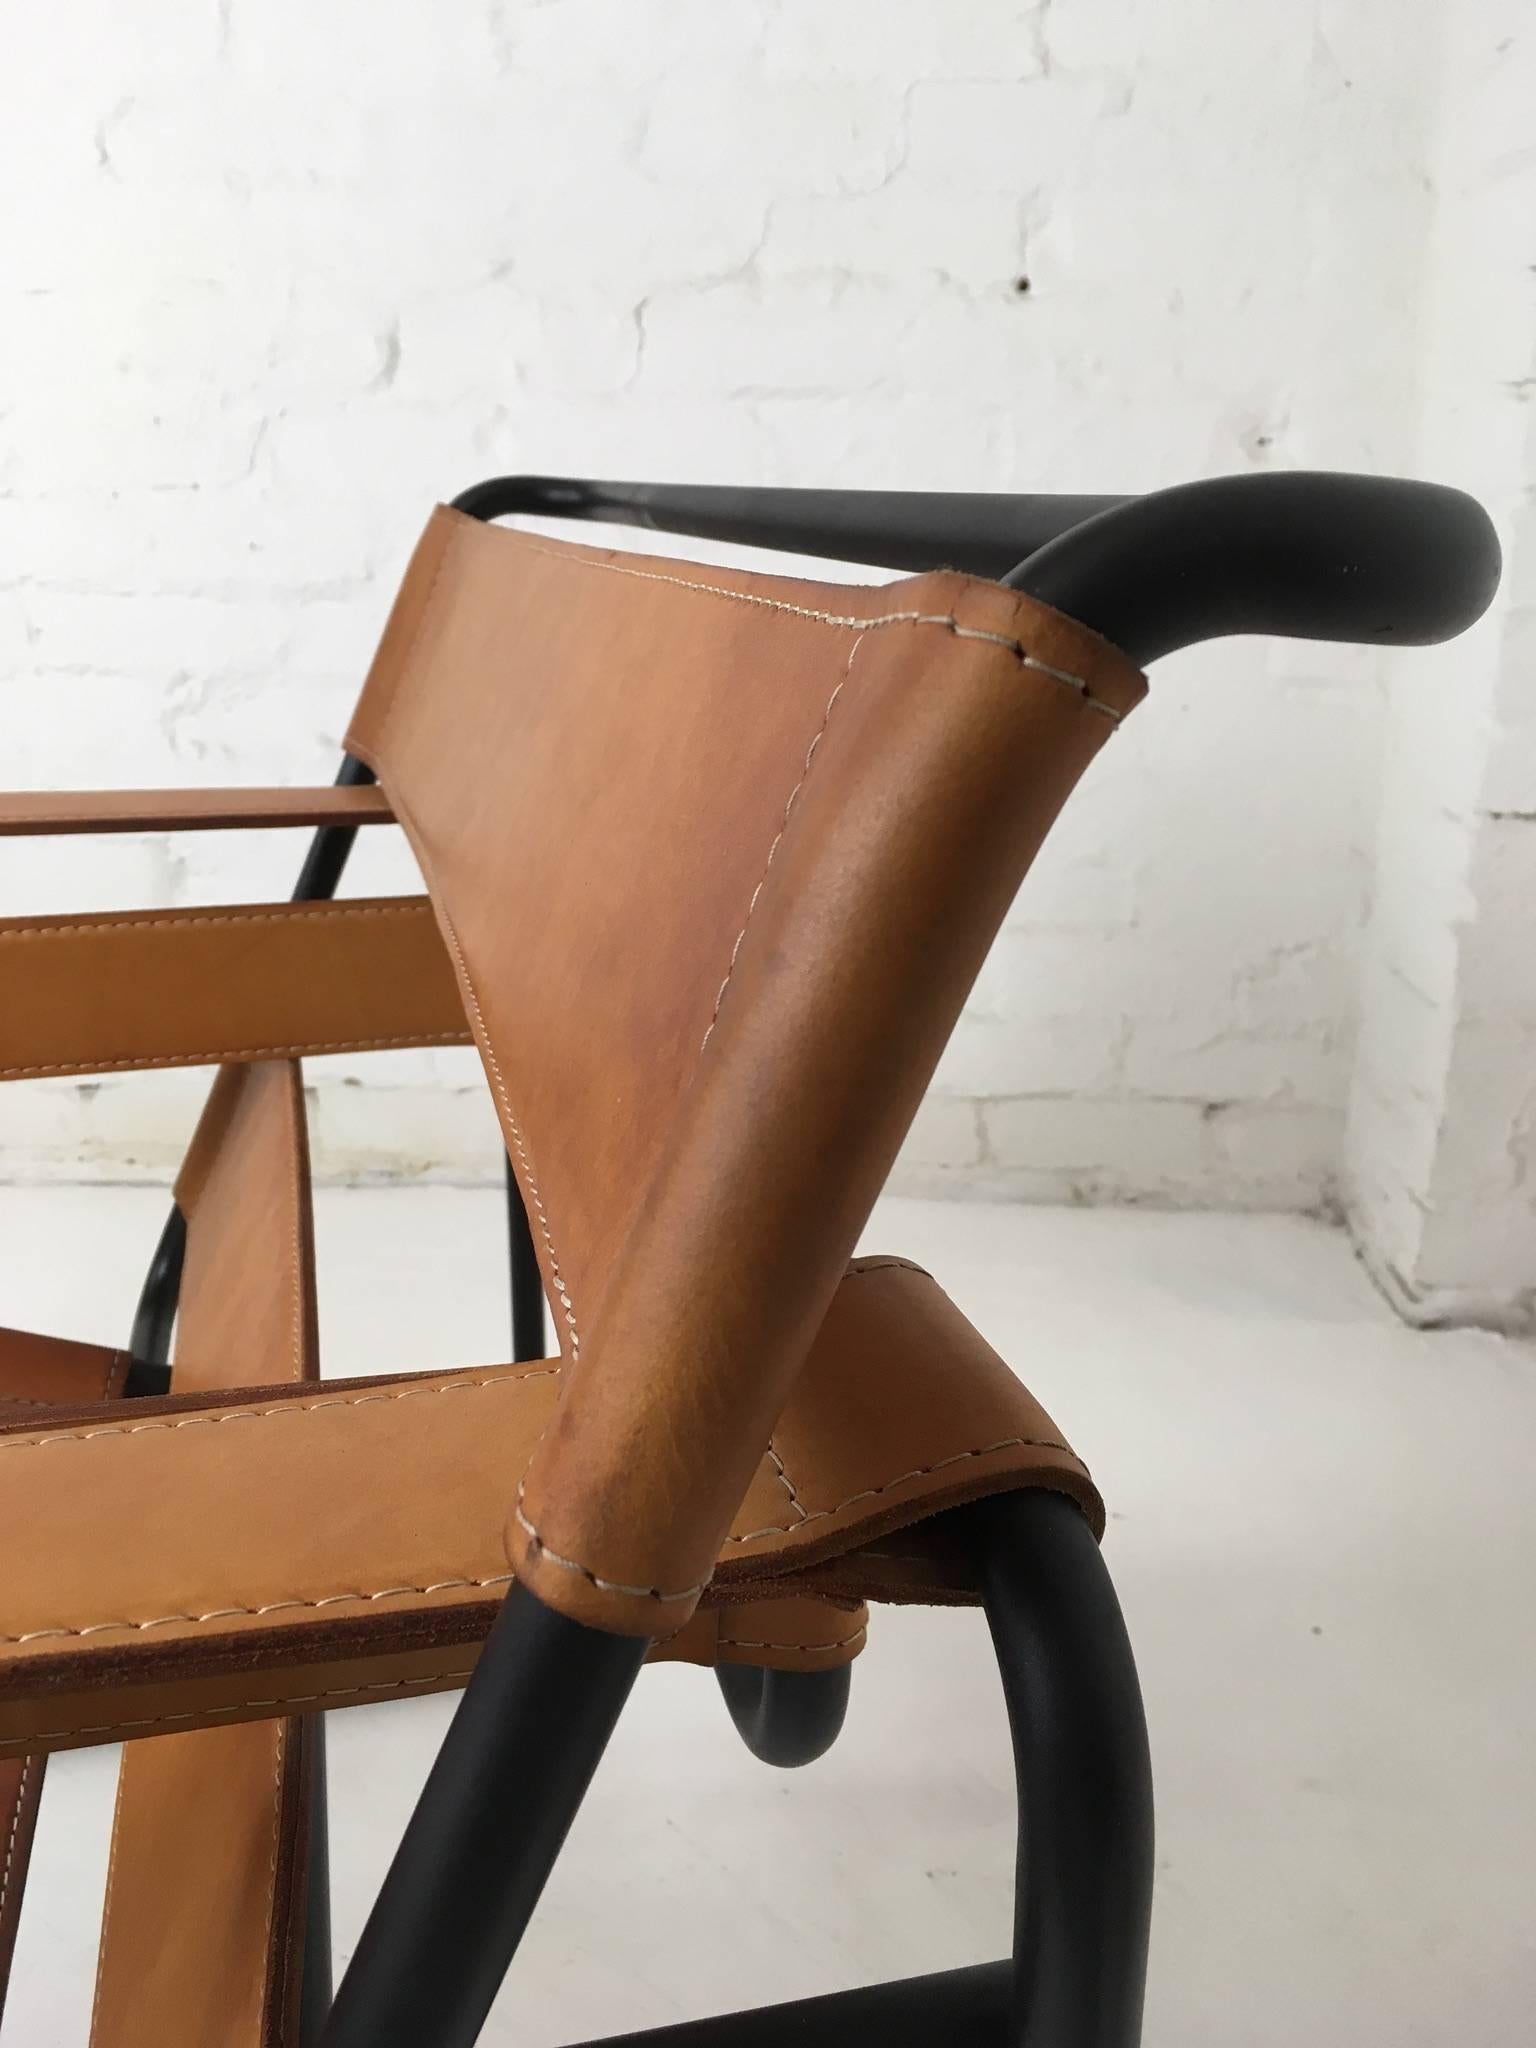 Reconditioned Marcel Breuer Wassily Chair with Black Frame 9